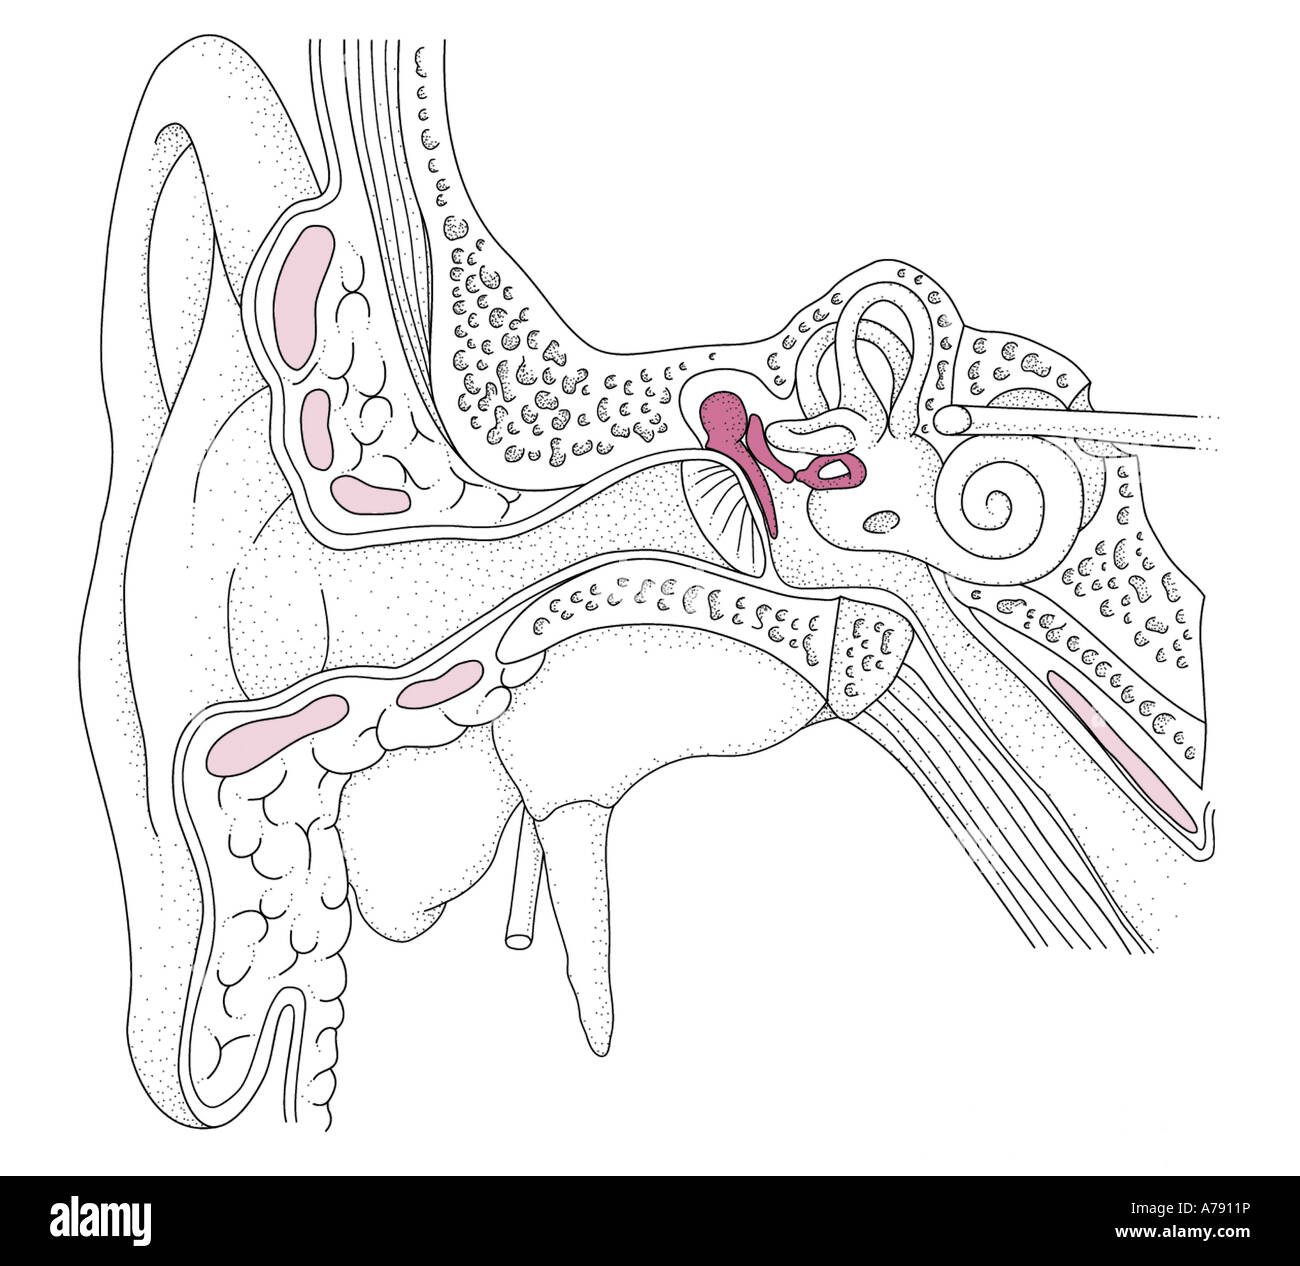 An illustration of the auditory apparatus of the ear, showing the outer, middle and inner ear. Stock Photo